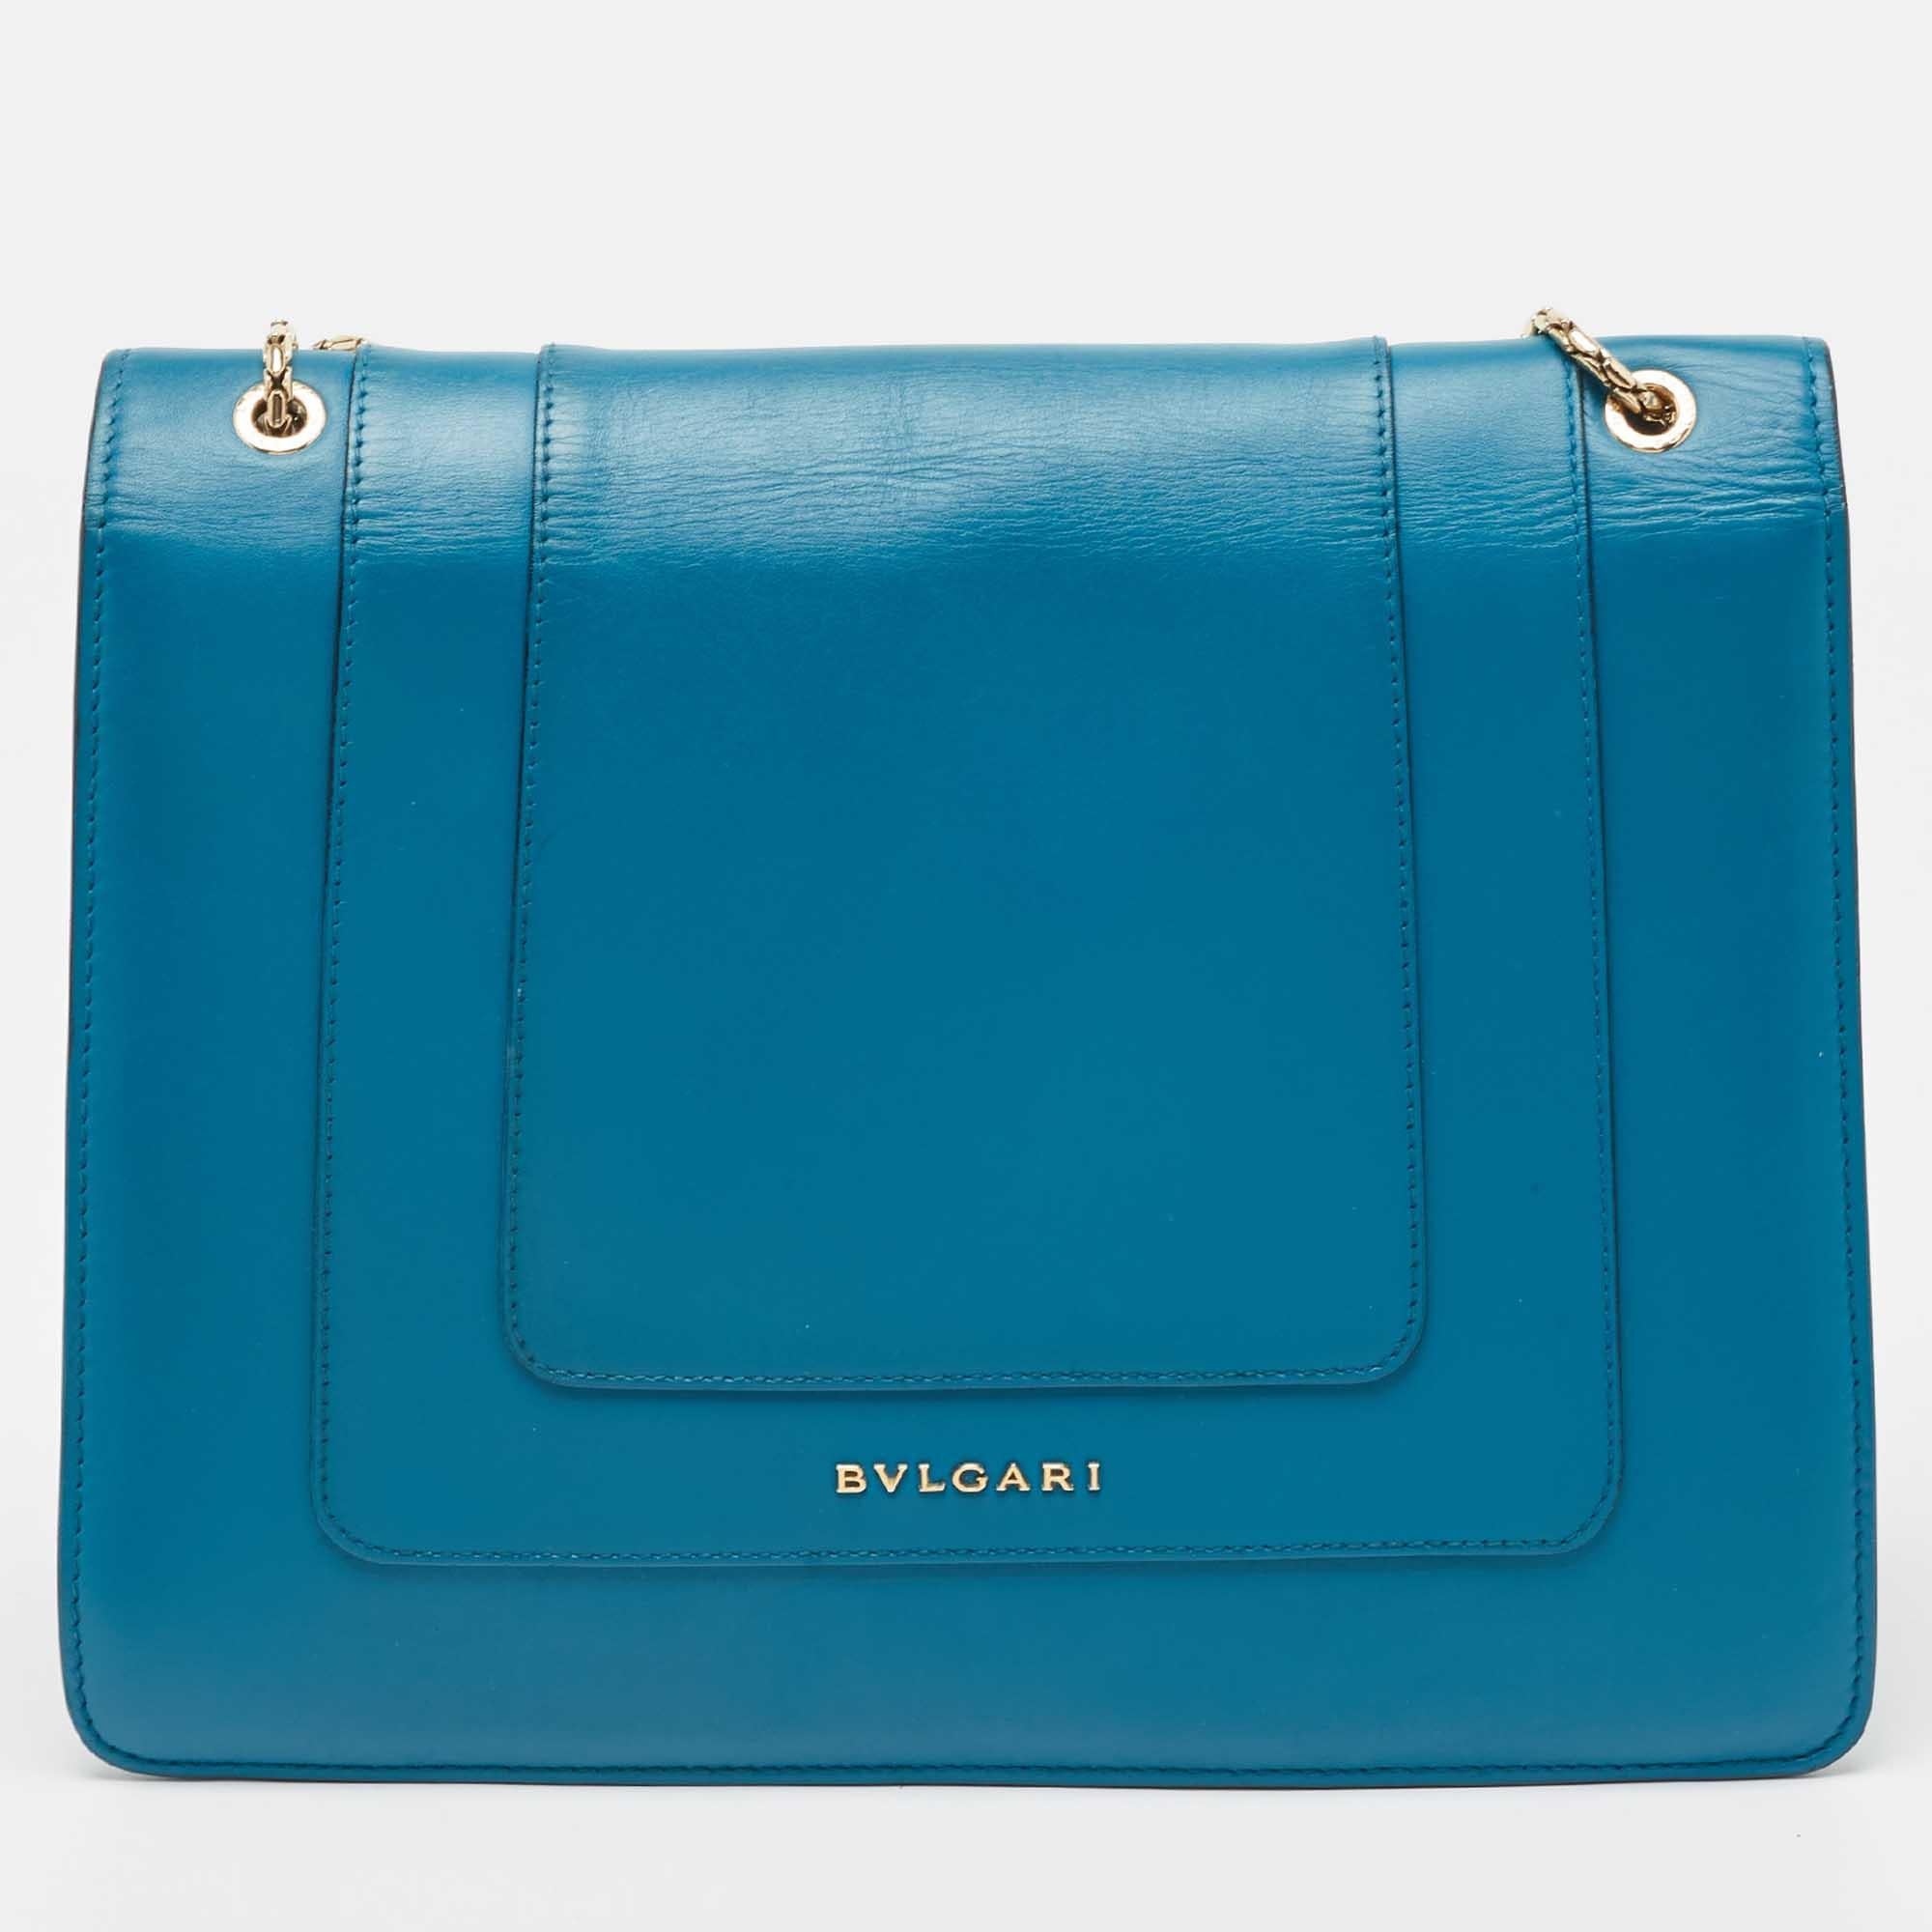 Bvlgari Turquoise Blue Leather Large Serpenti Forever Shoulder Bag 3